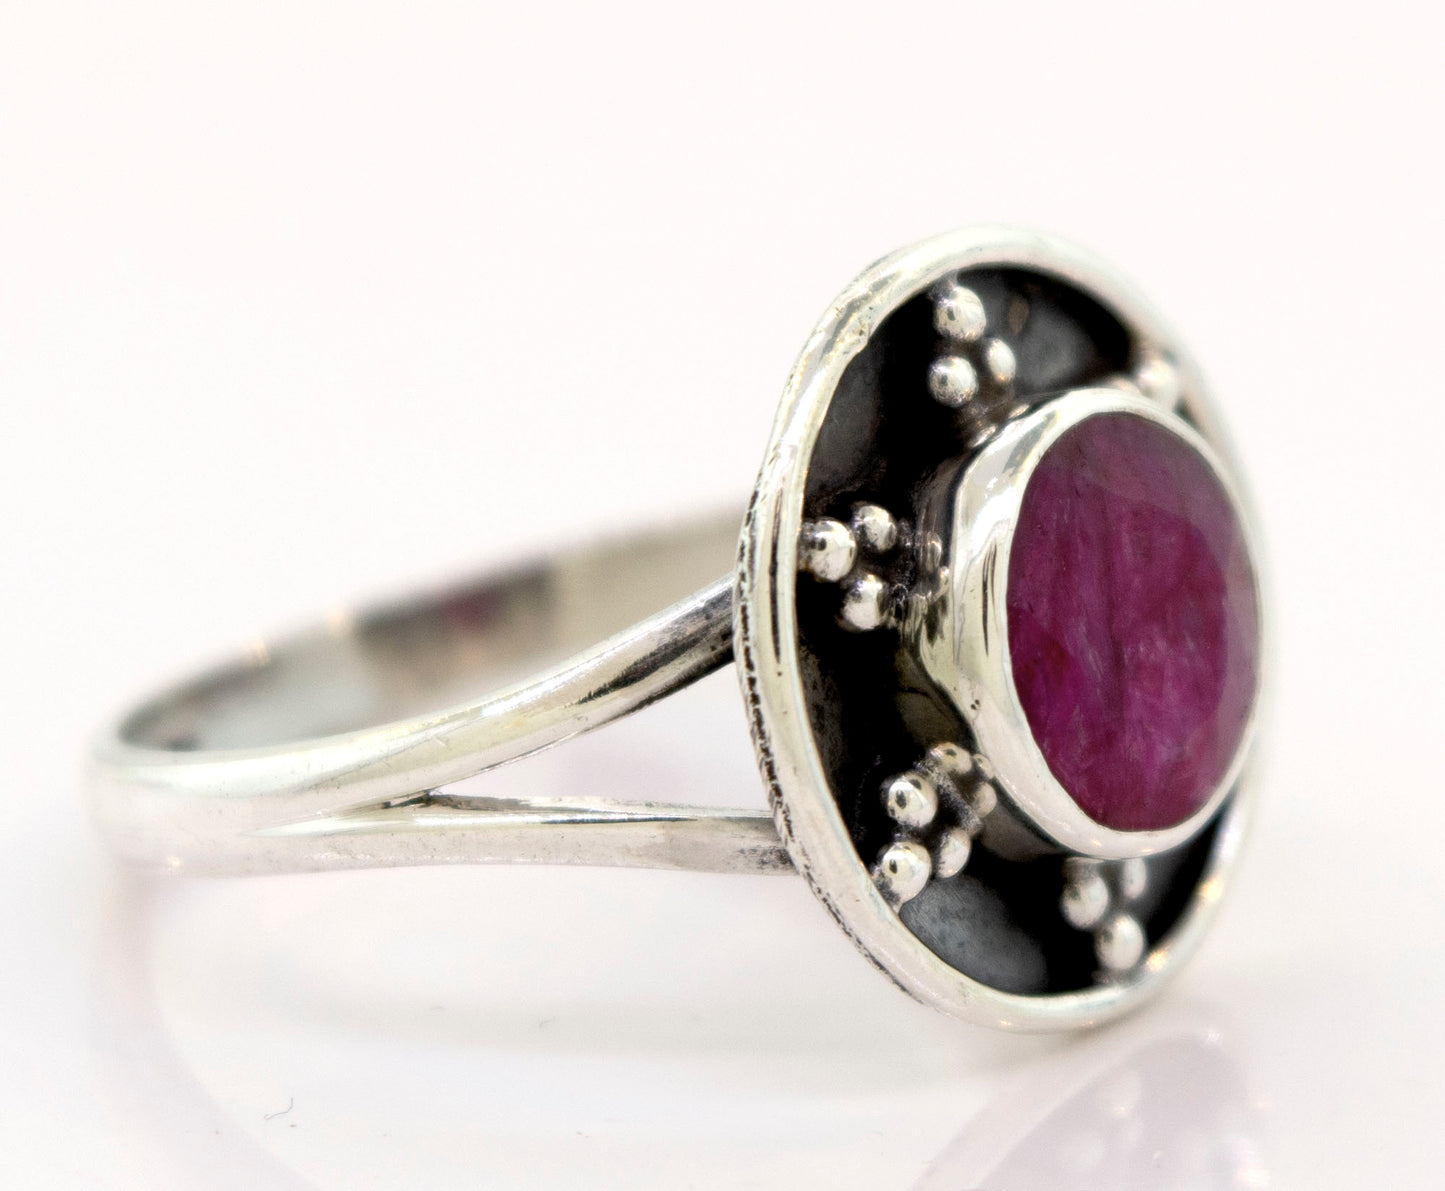 An Ruby Ring With Unique Oxidized Silver Design from Super Silver.